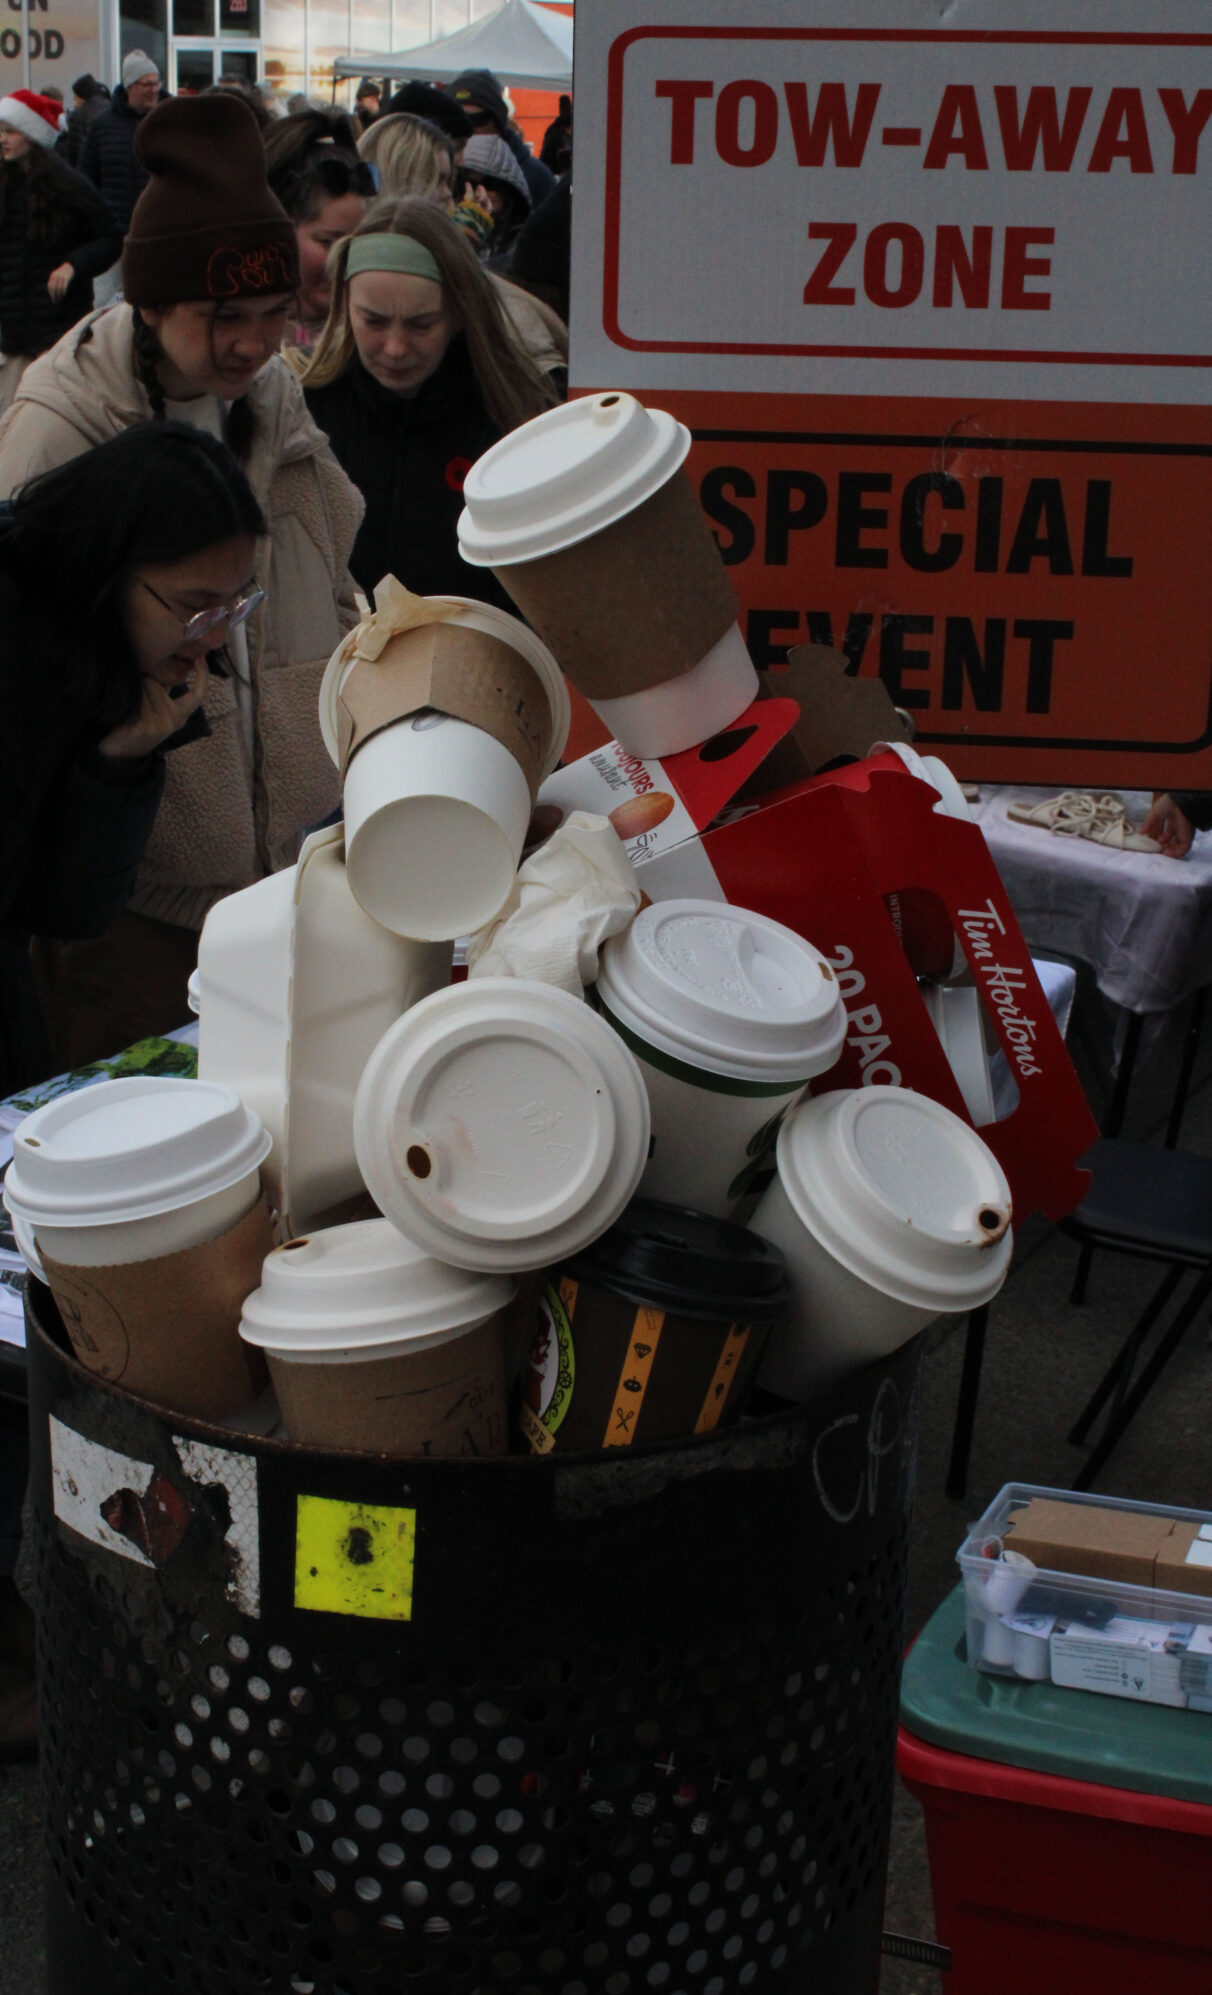 A garbage can overflows with coffee cups next to signs that say "Tow-Away Zone" and "Special Event."